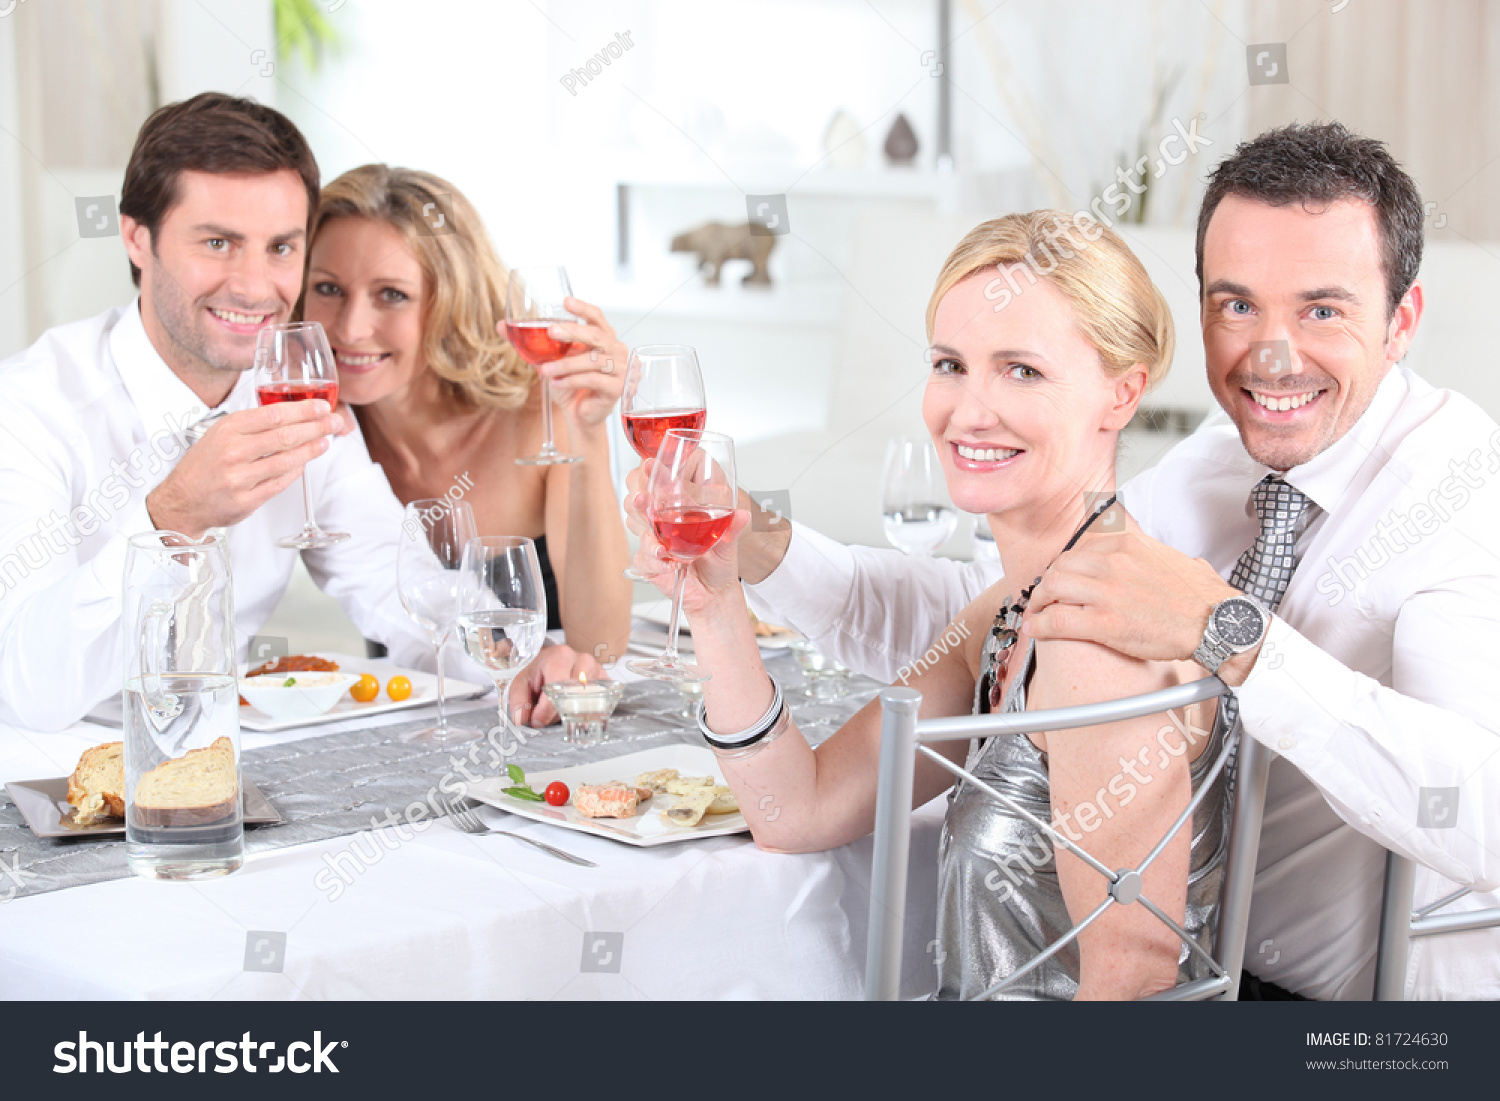 Couples At Dinner Stock Photo 81724630 : Shutterstock